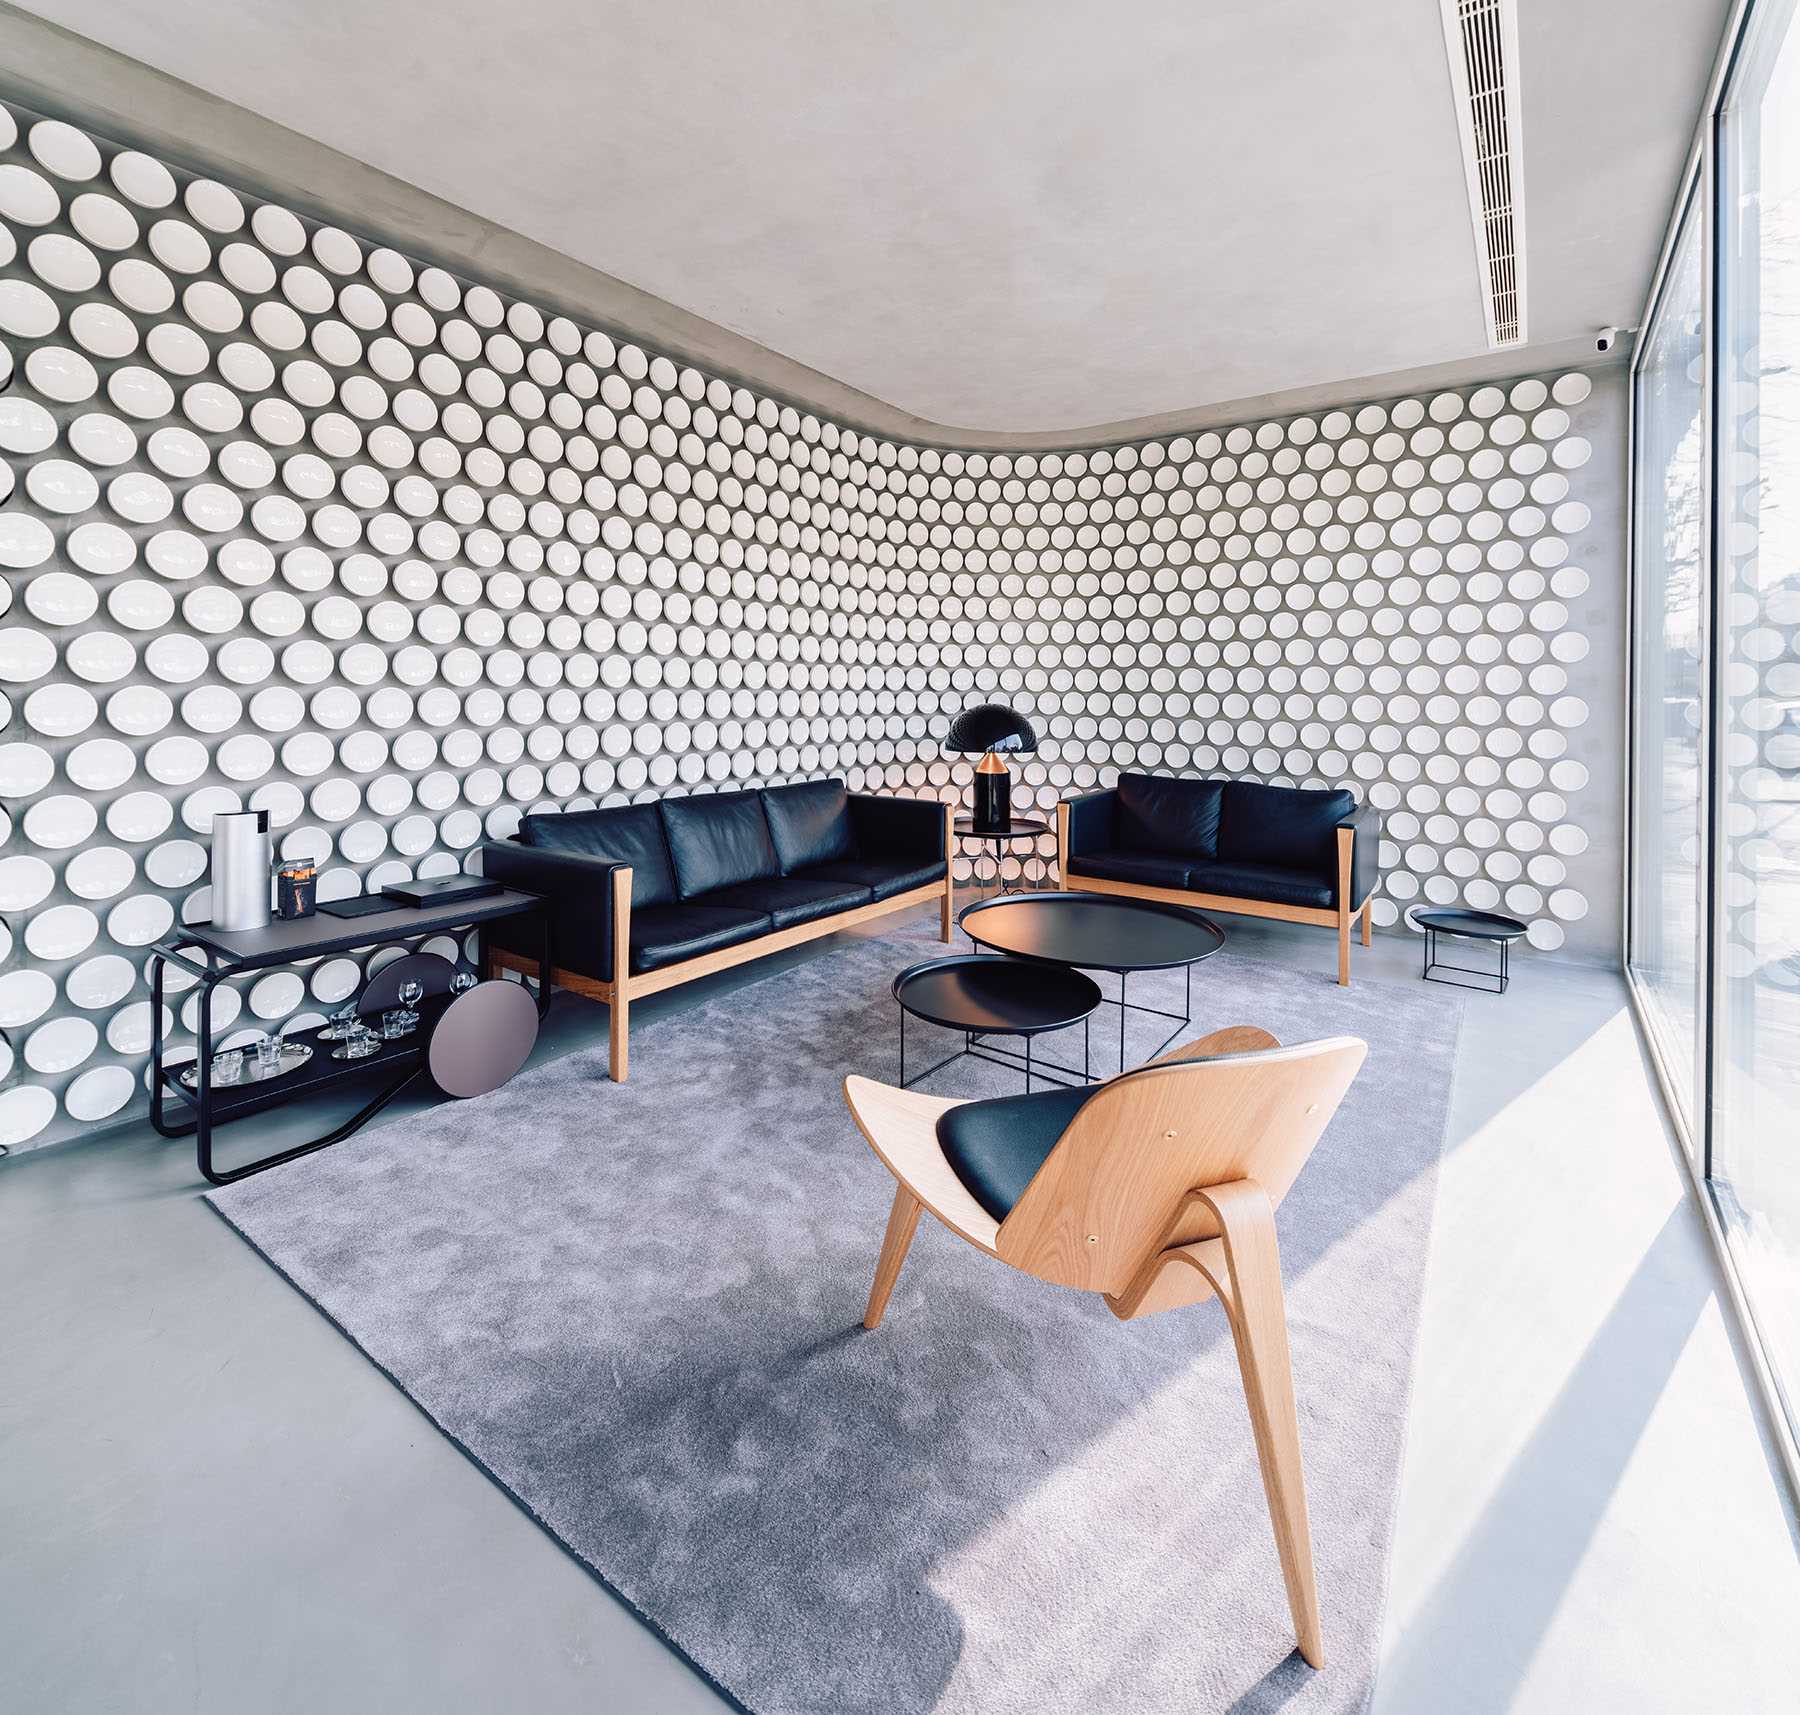 More than 500 hand-crafted ceramic discs line the wall of this modern dental clinic.